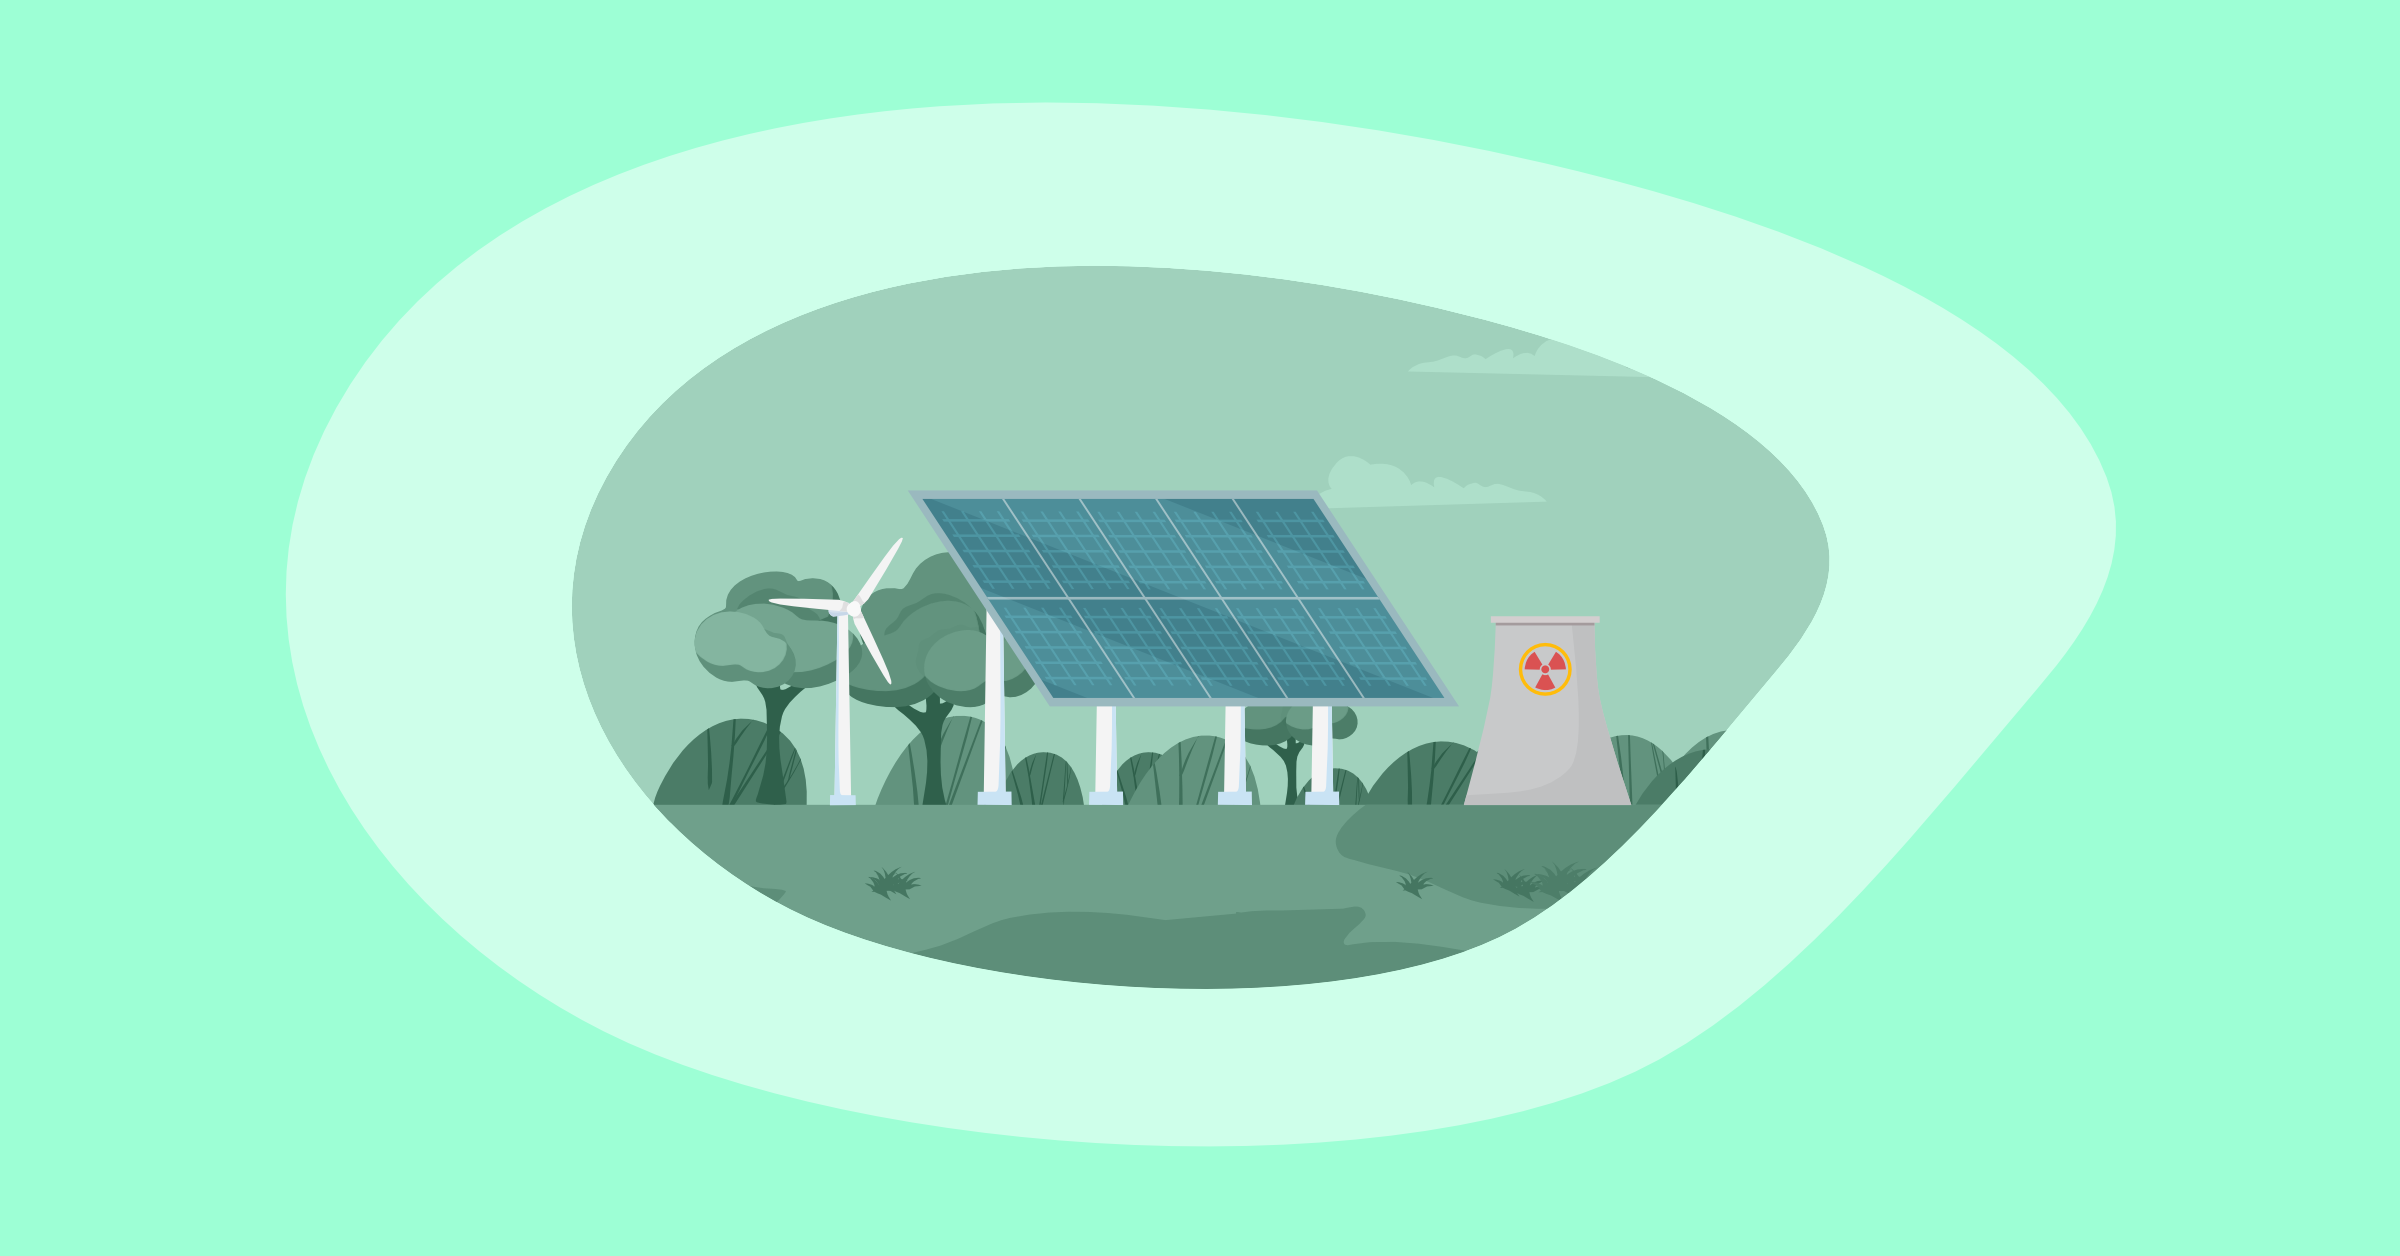 Illustration of clean and alternative energies